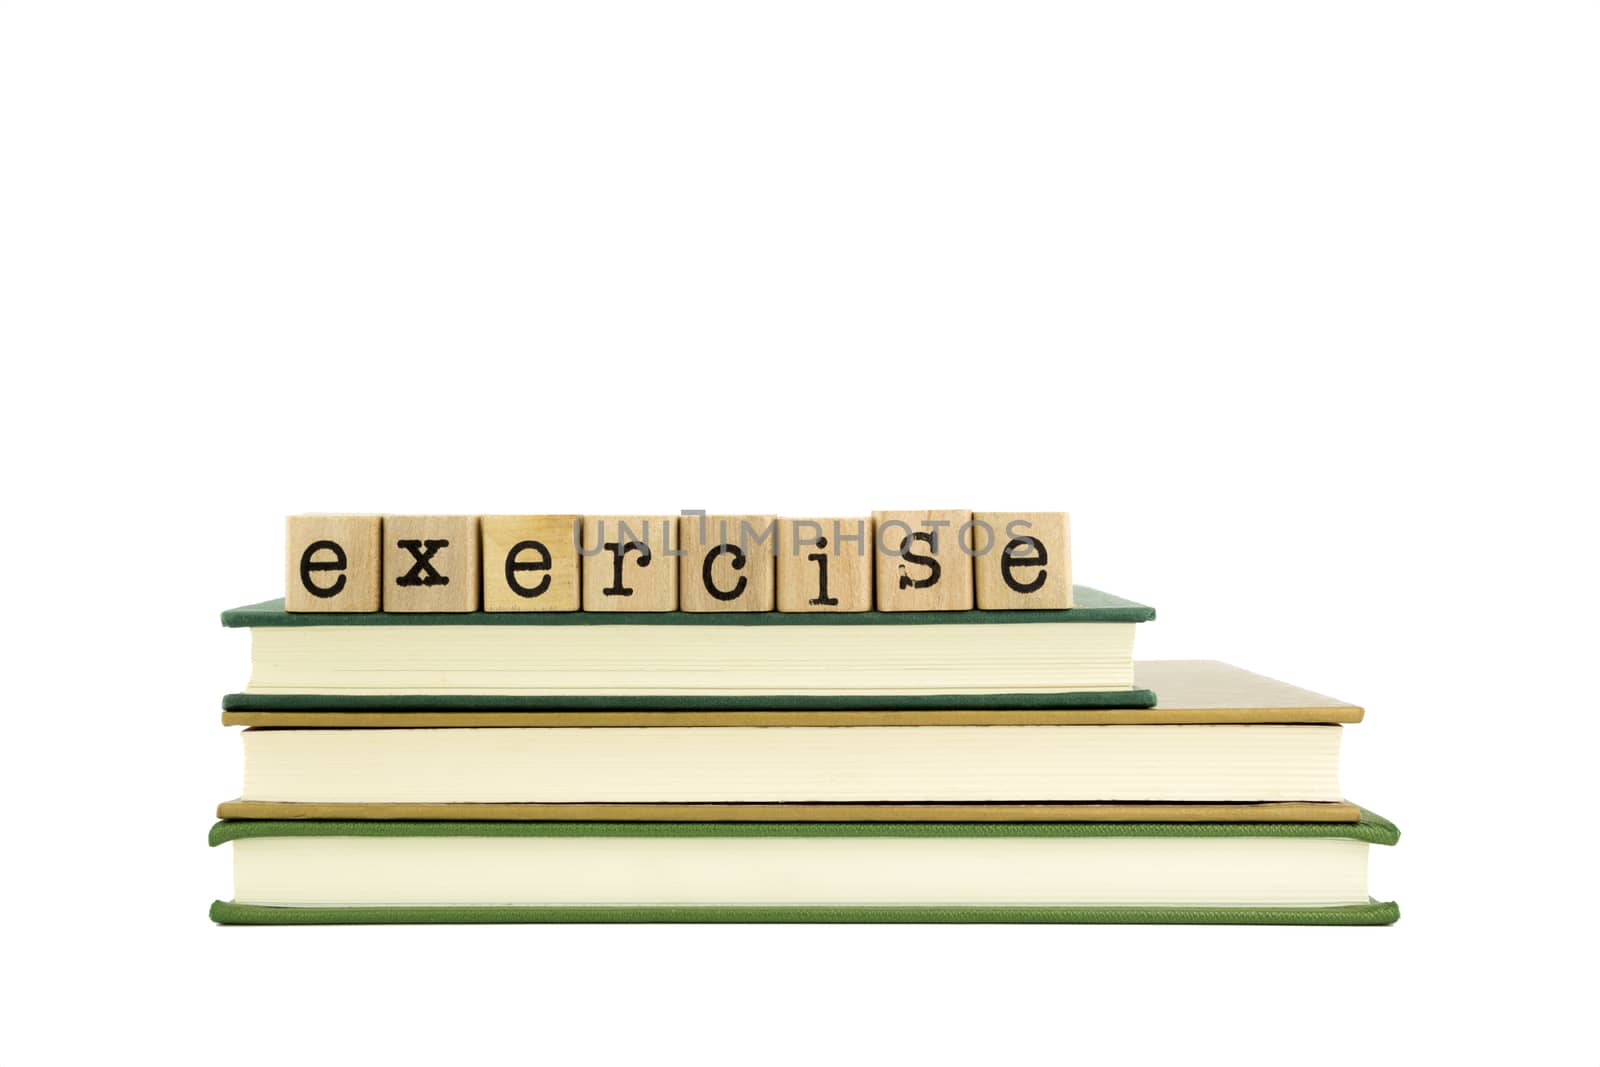 exercise word on wood stamps stack on books, homework and learning concept